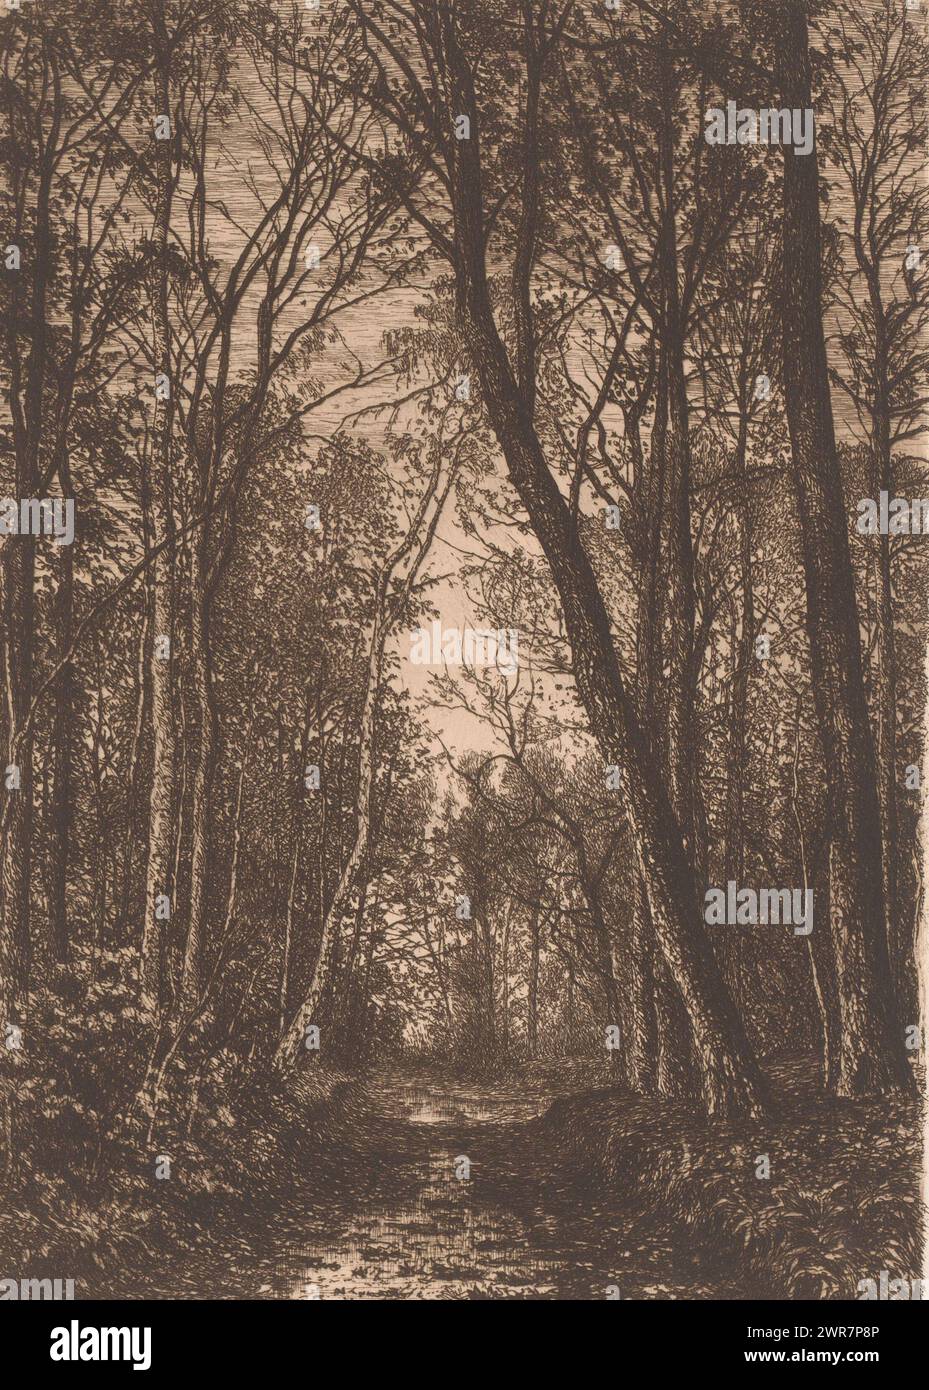 Forest path in autumn, print maker: Alfred Elsen, 1860 - 1910, paper, etching, height 280 mm × width 197 mm, print Stock Photo